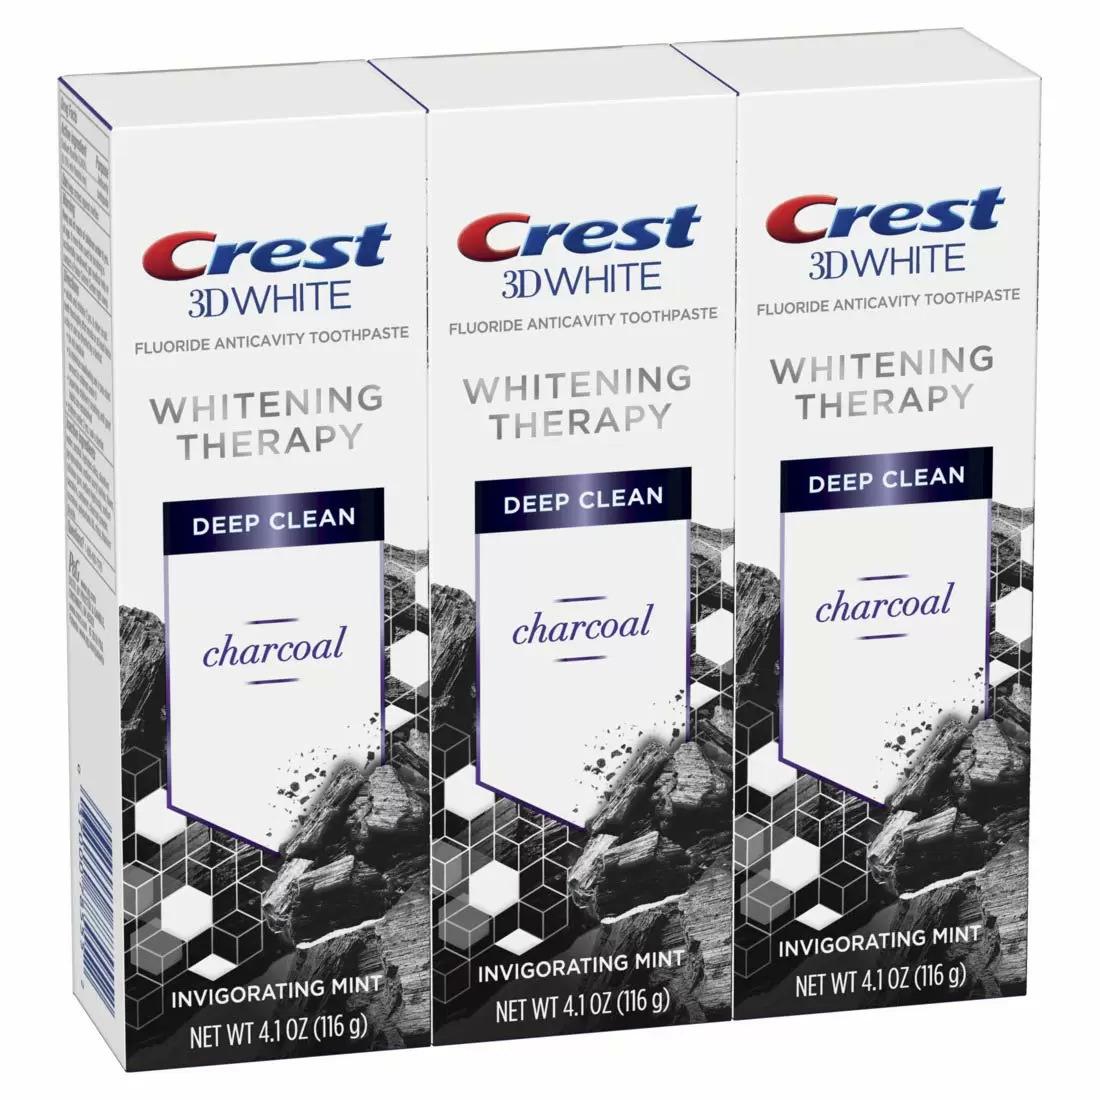 3 Crest 3D White Deep Clean Charcoal Toothpastes for $8.01 Shipped